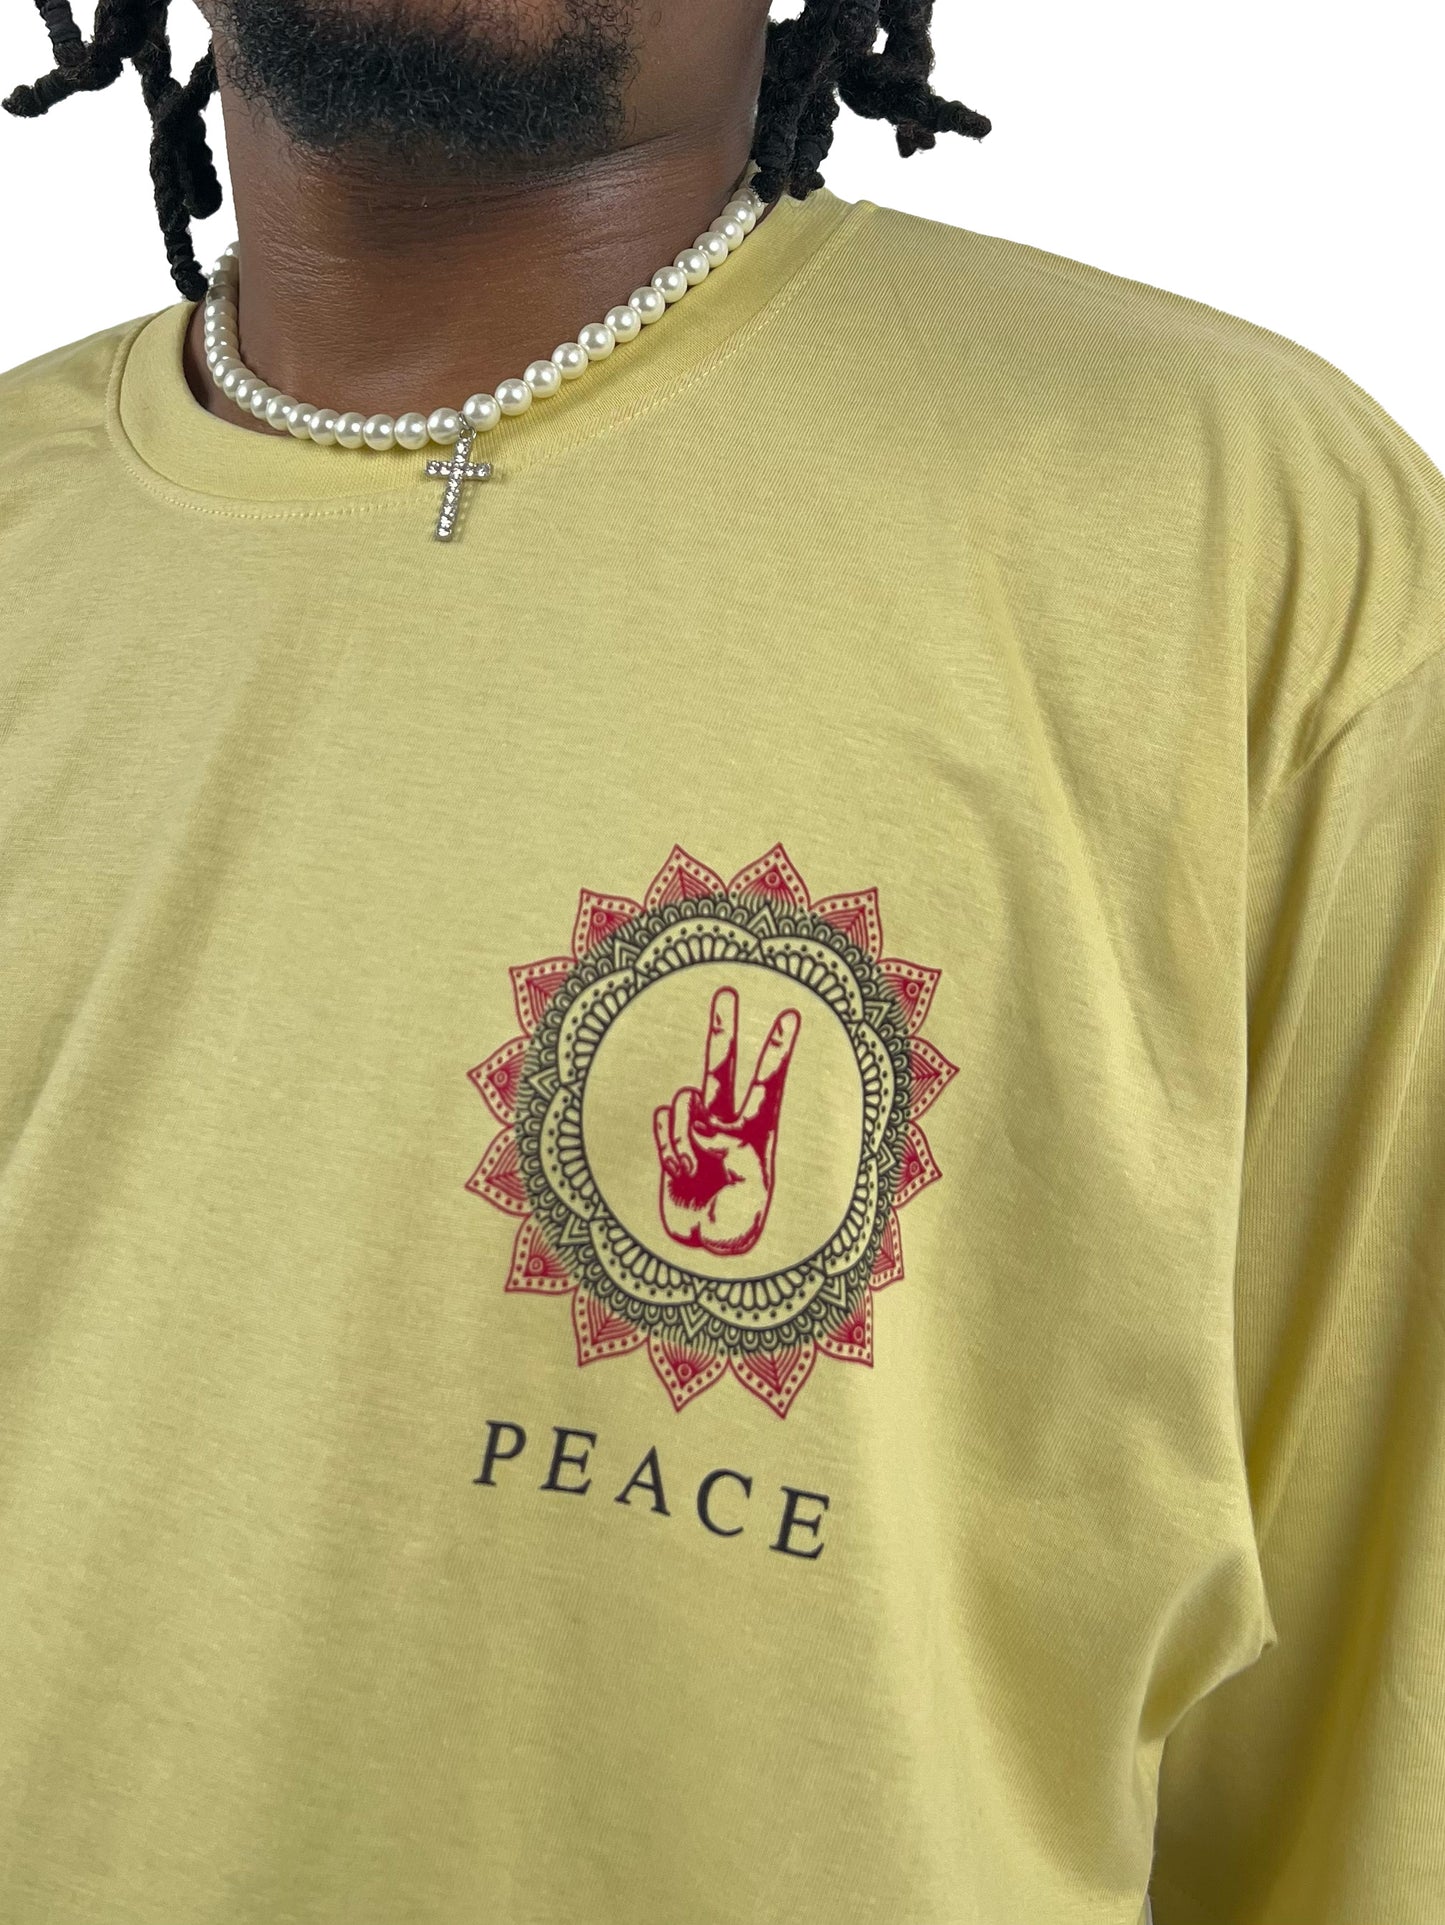 Difference of Opinion oversized peace backprint t-shirt